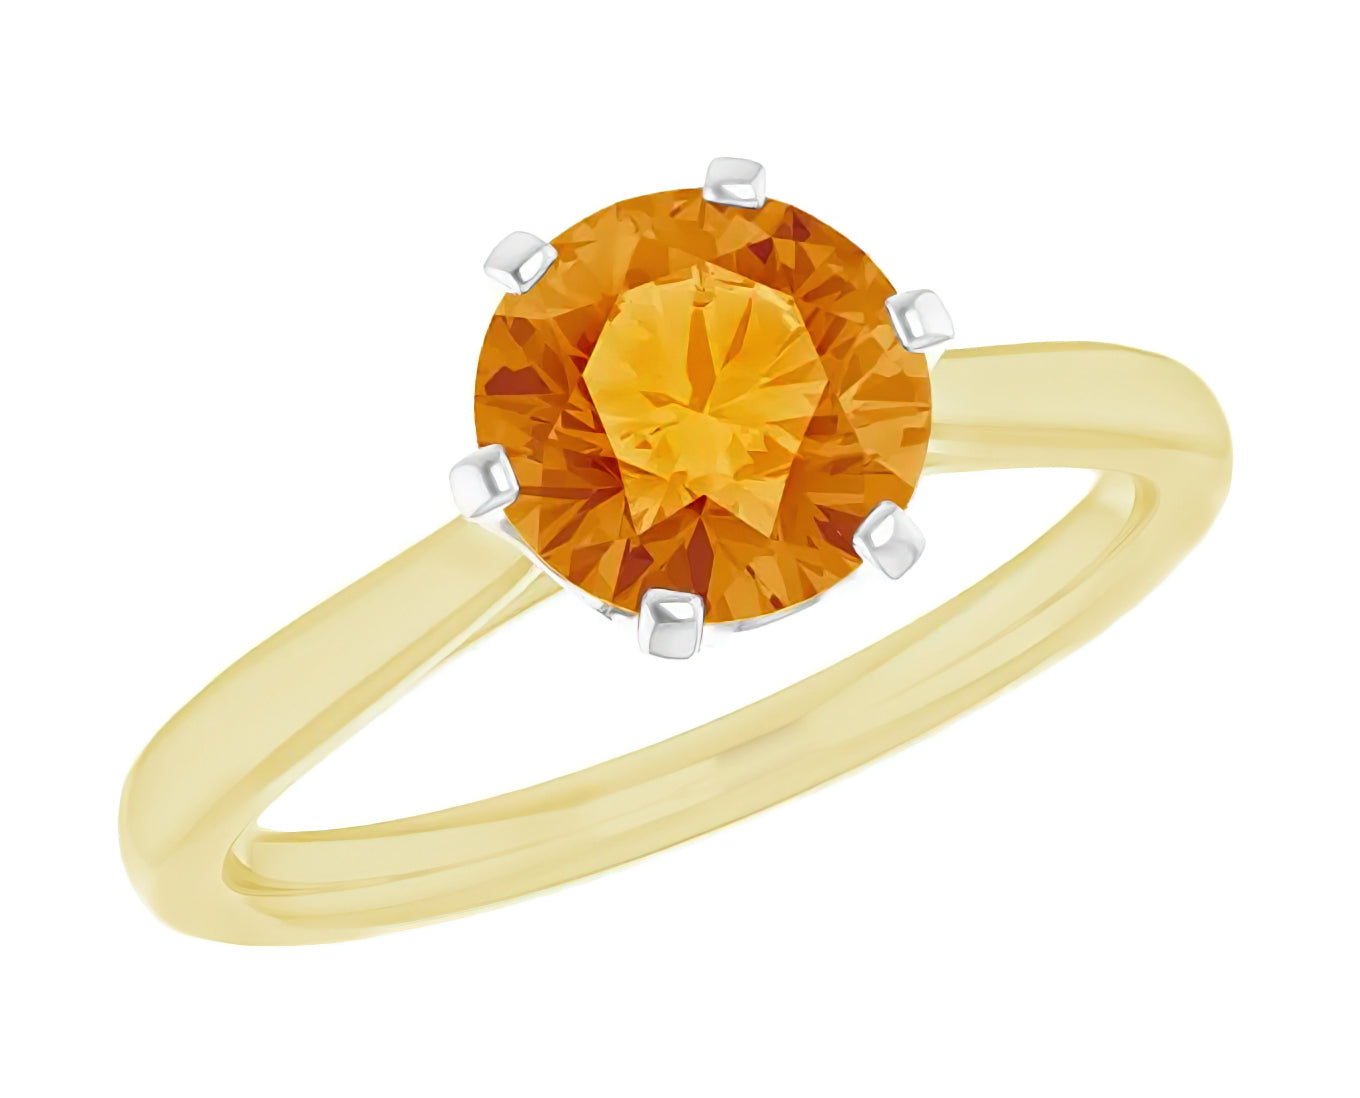 Heirloom Crown Citrine Solitaire Engagement Ring in 14 Karat Yellow and White Gold Mixed Metals - Item: R102 - Image: 3